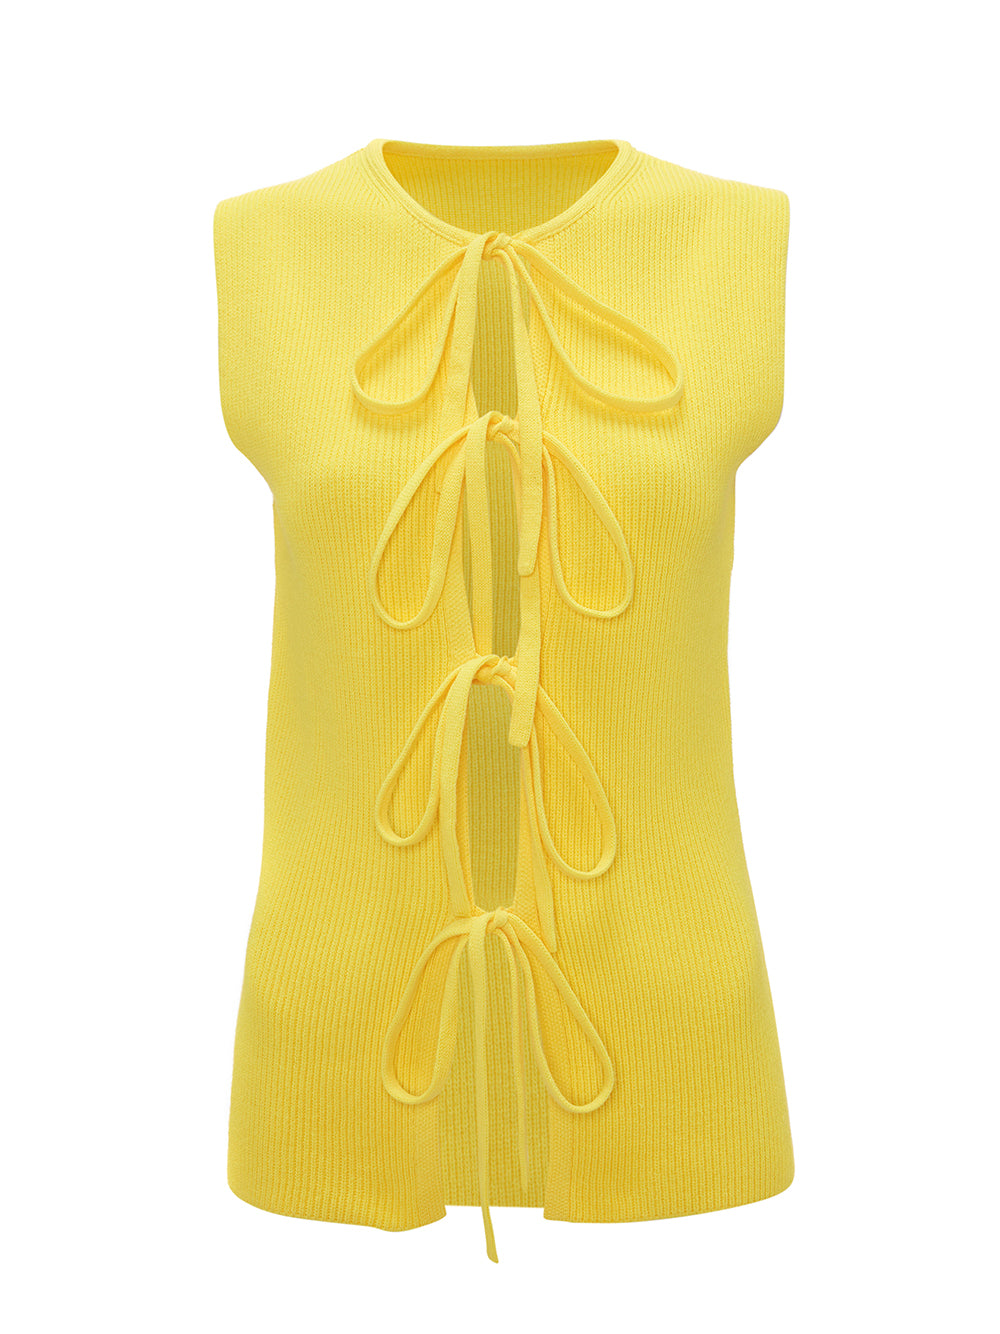 Bow Tie Tank Top (Bright Yellow)